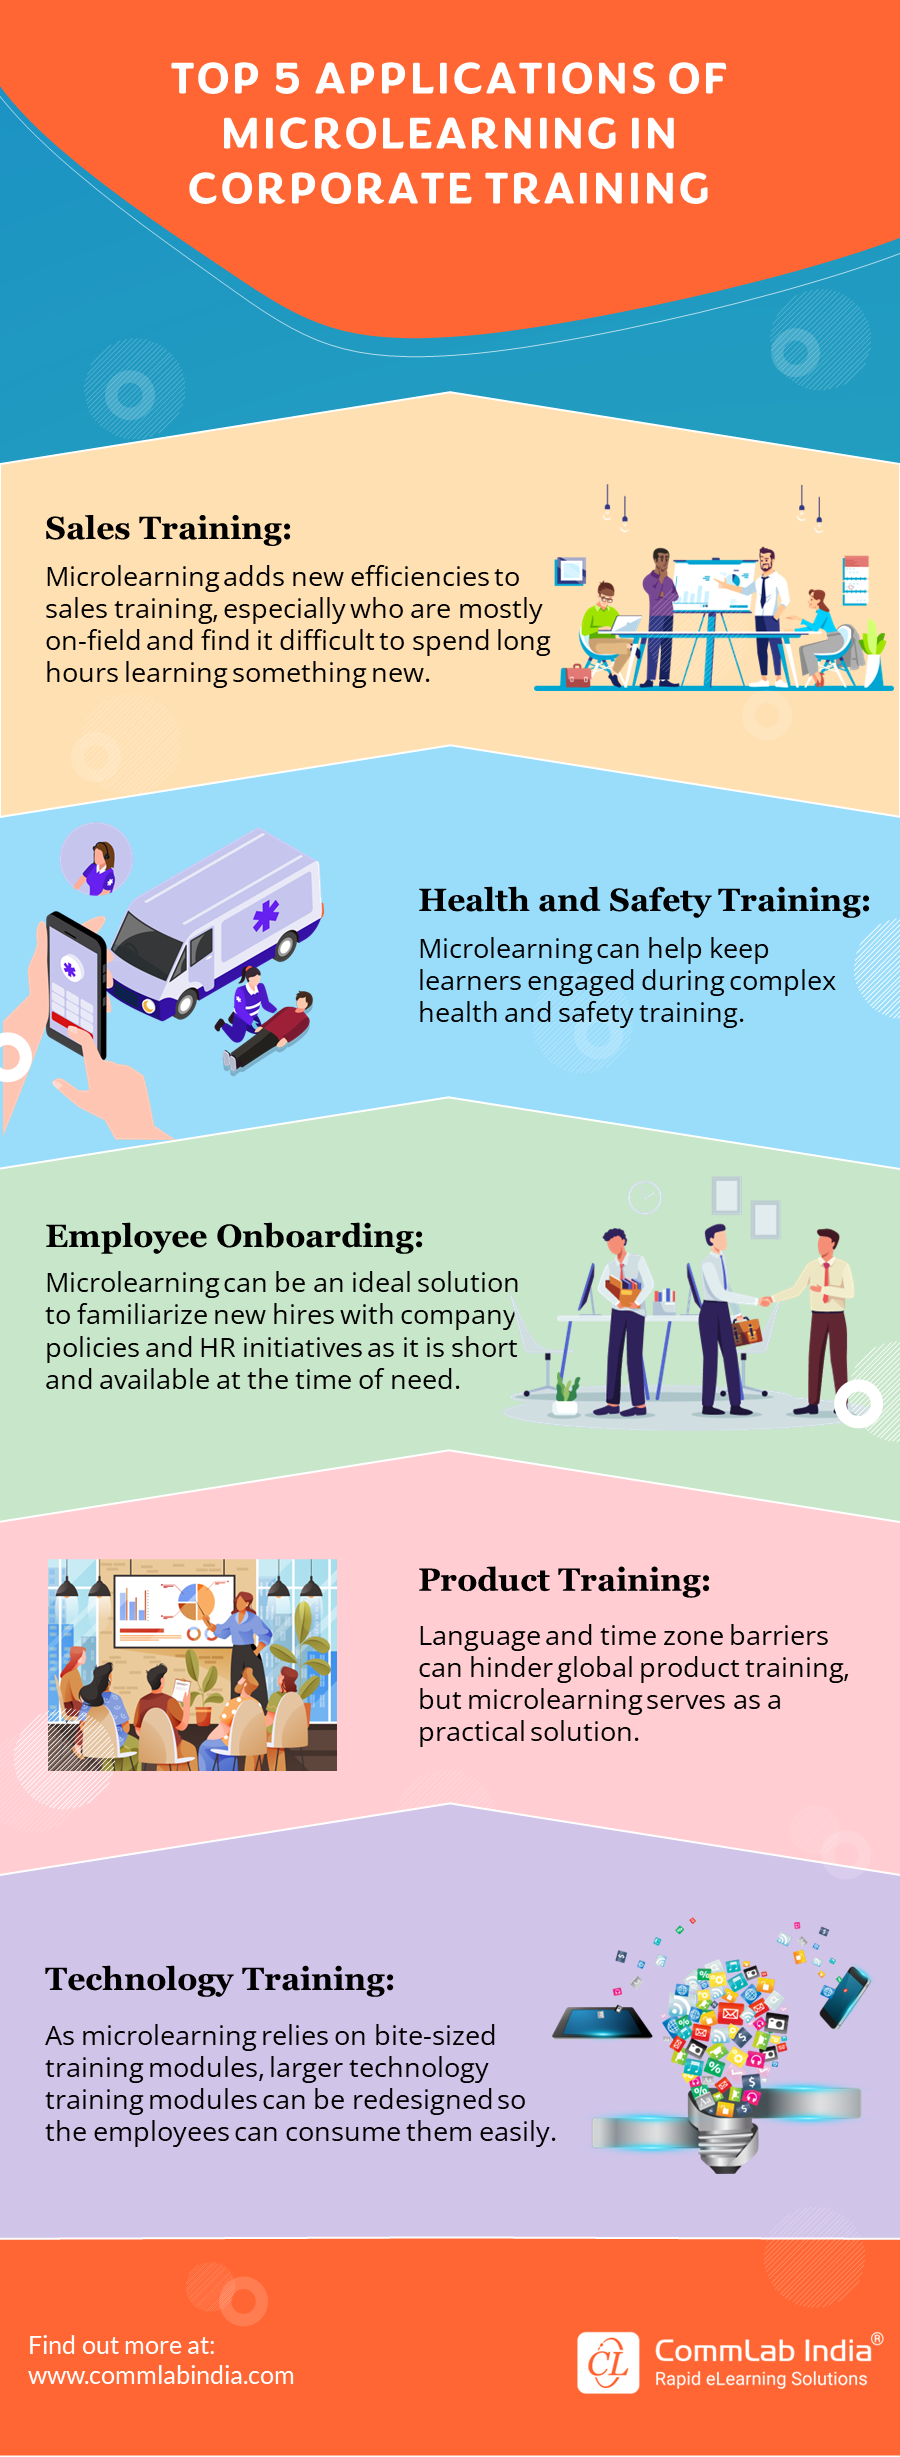 Impressive Applications of Microlearning in Corporate Training [Infographic]